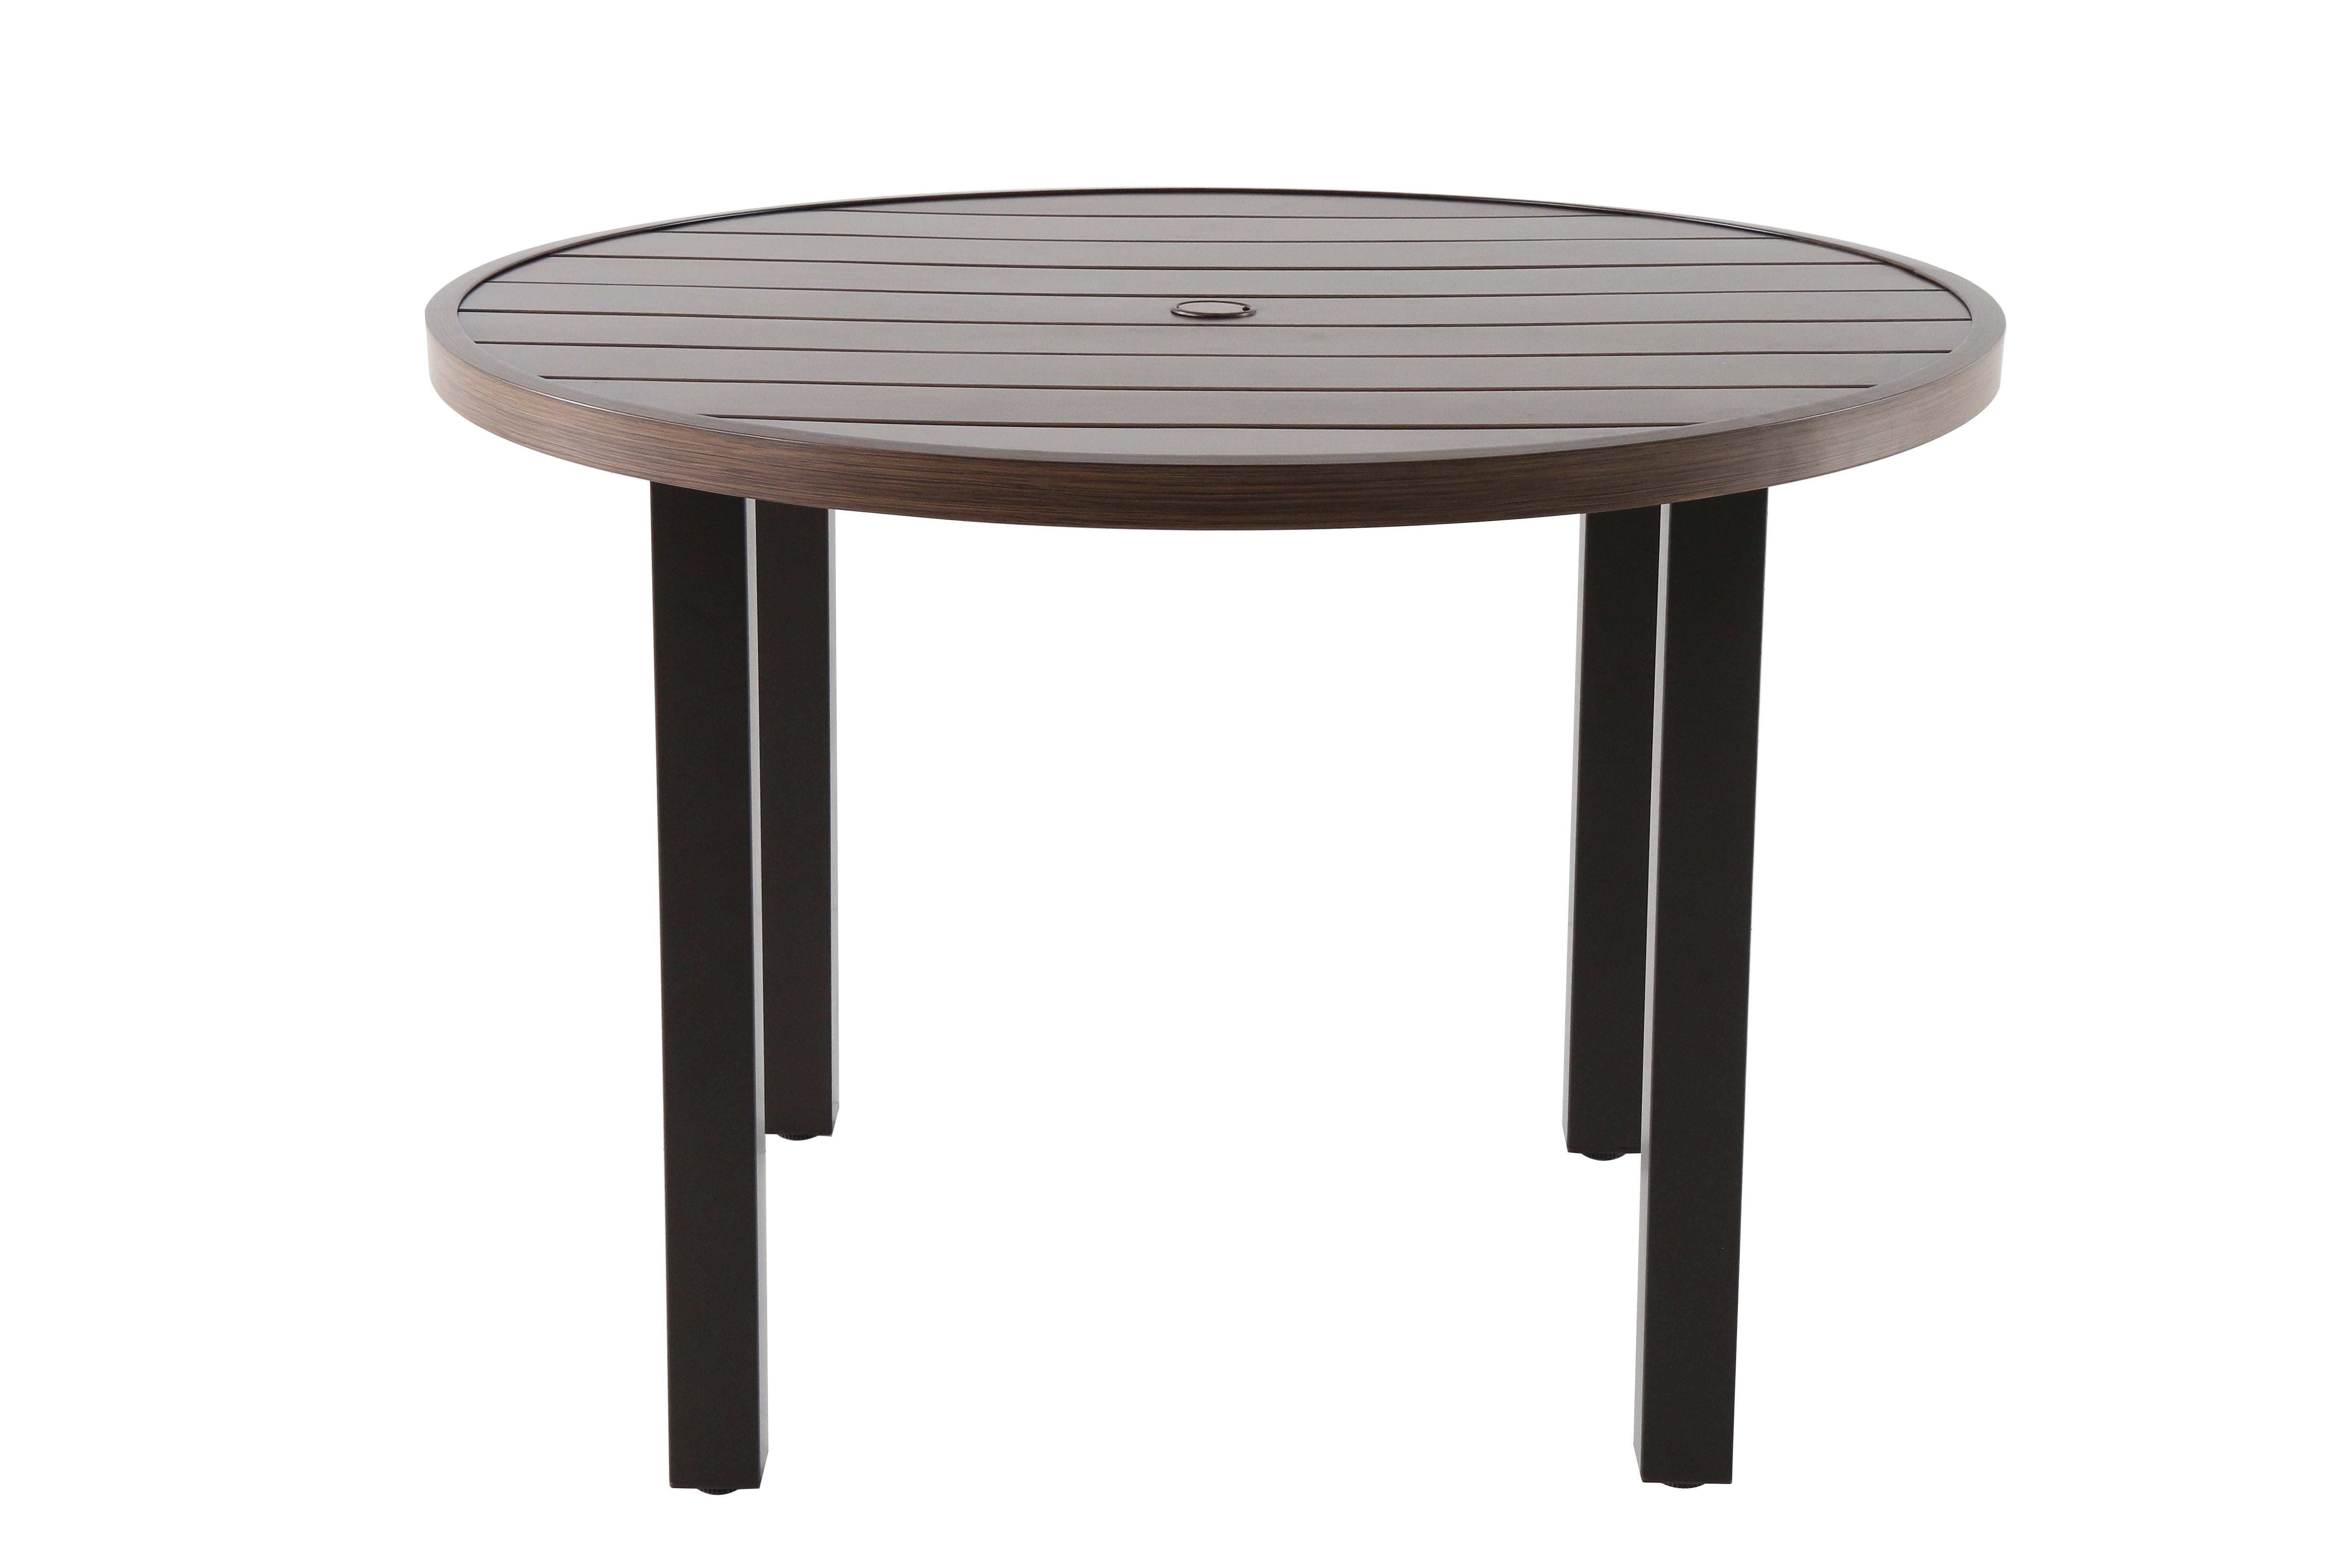 Firenza 120cm round table - Dining Tables (3604) - Sena Home Furniture